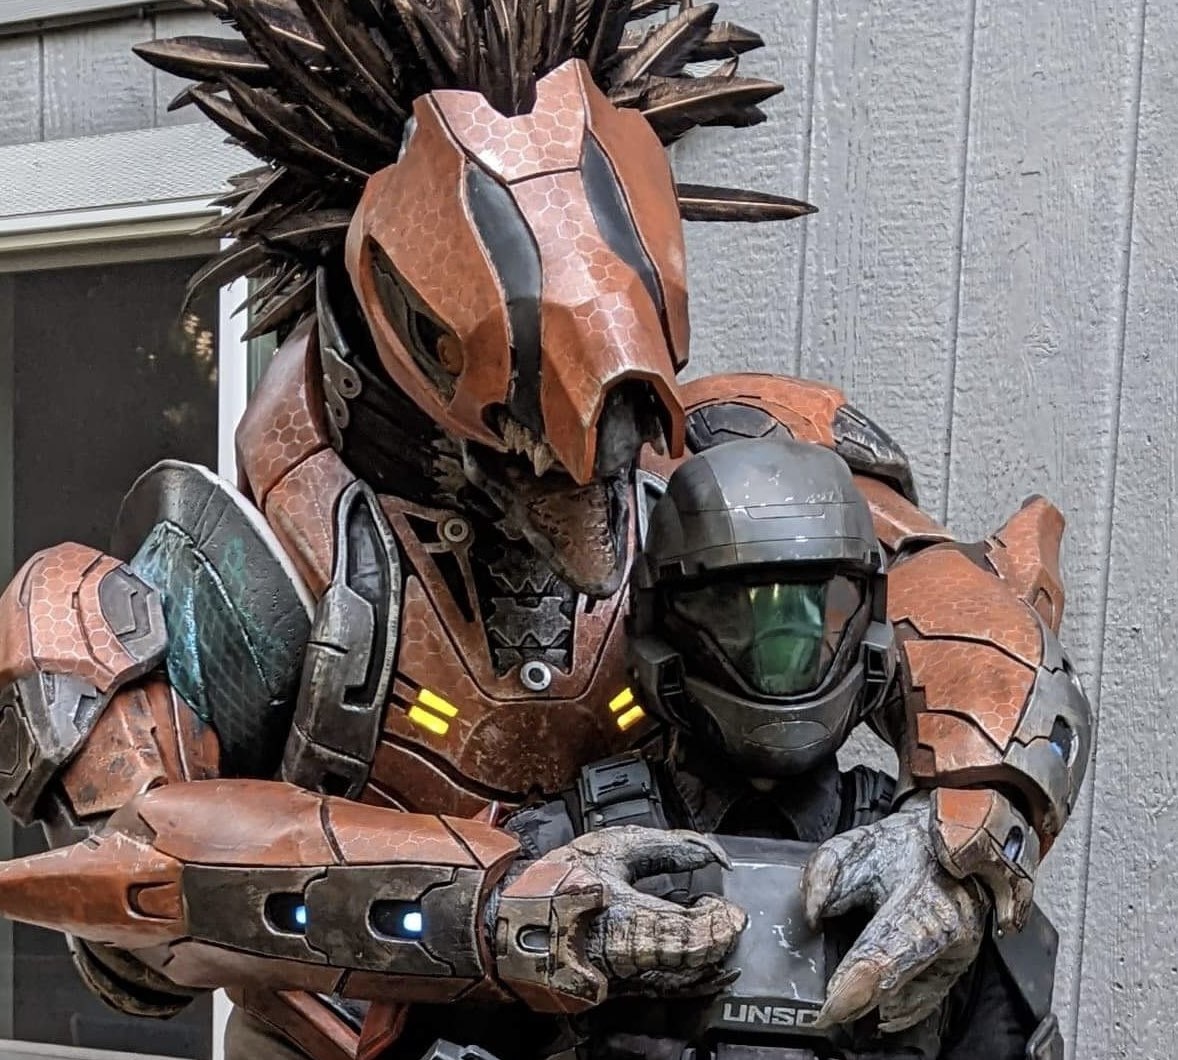 WexyLex Skirmisher cosplay posing with an ODST cosplayer